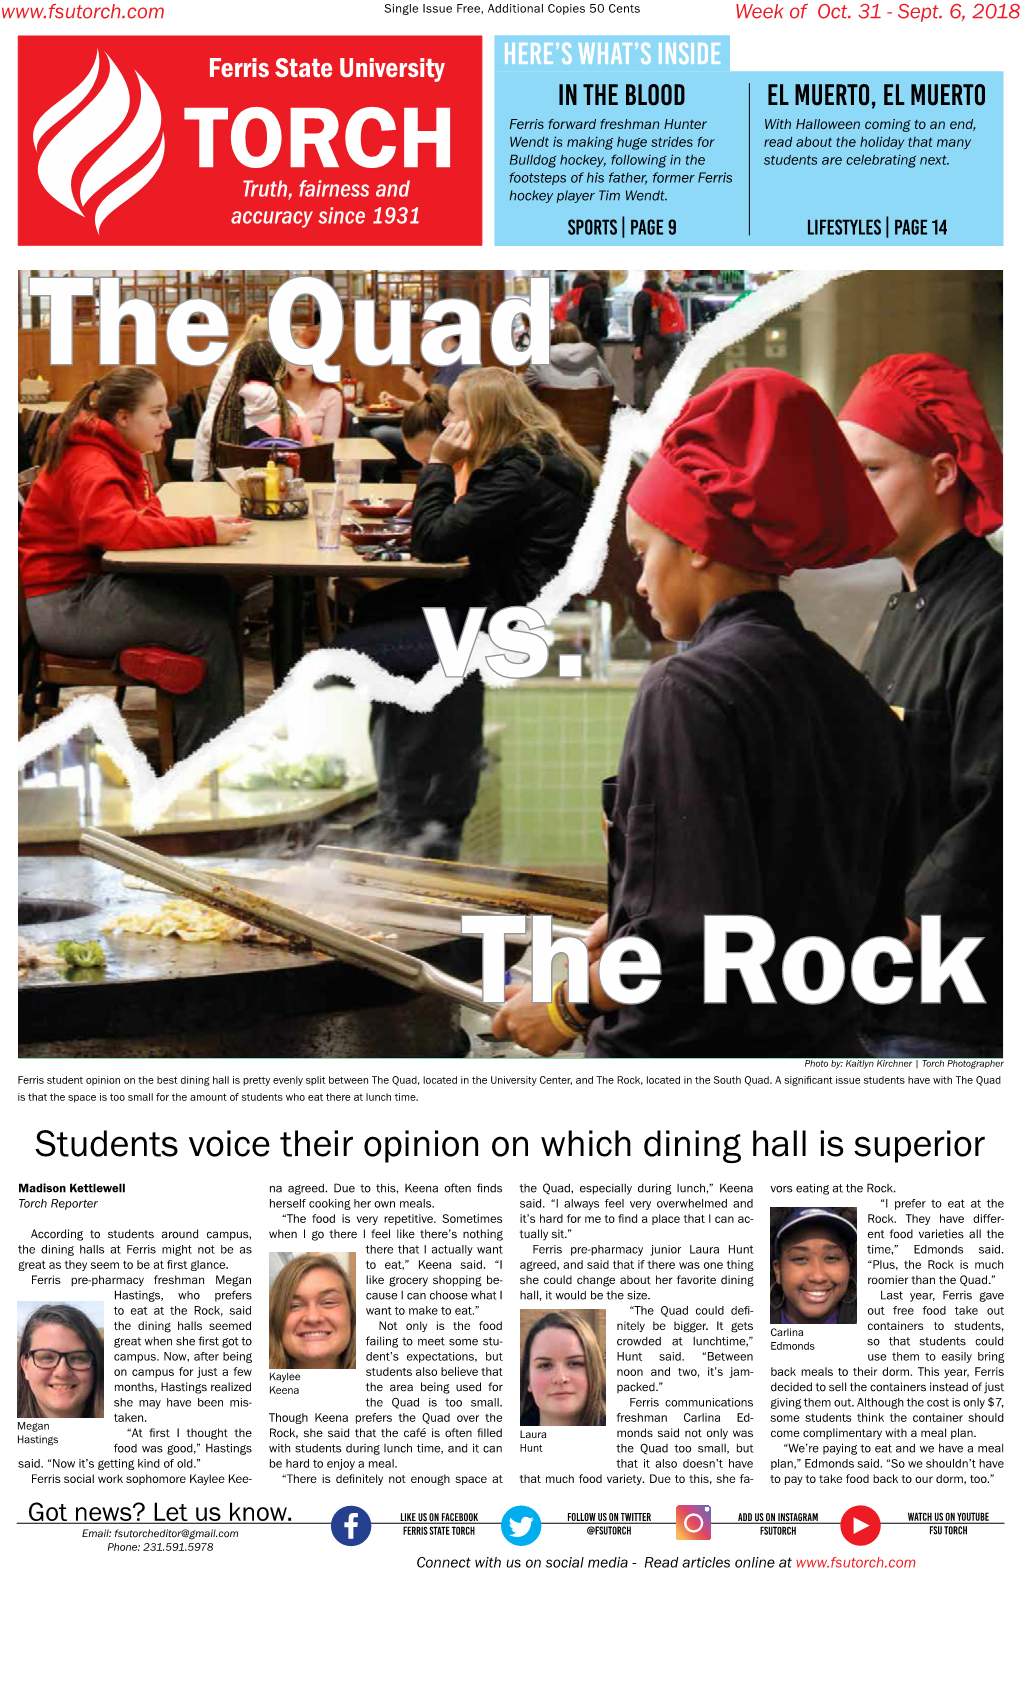 Students Voice Their Opinion on Which Dining Hall Is Superior